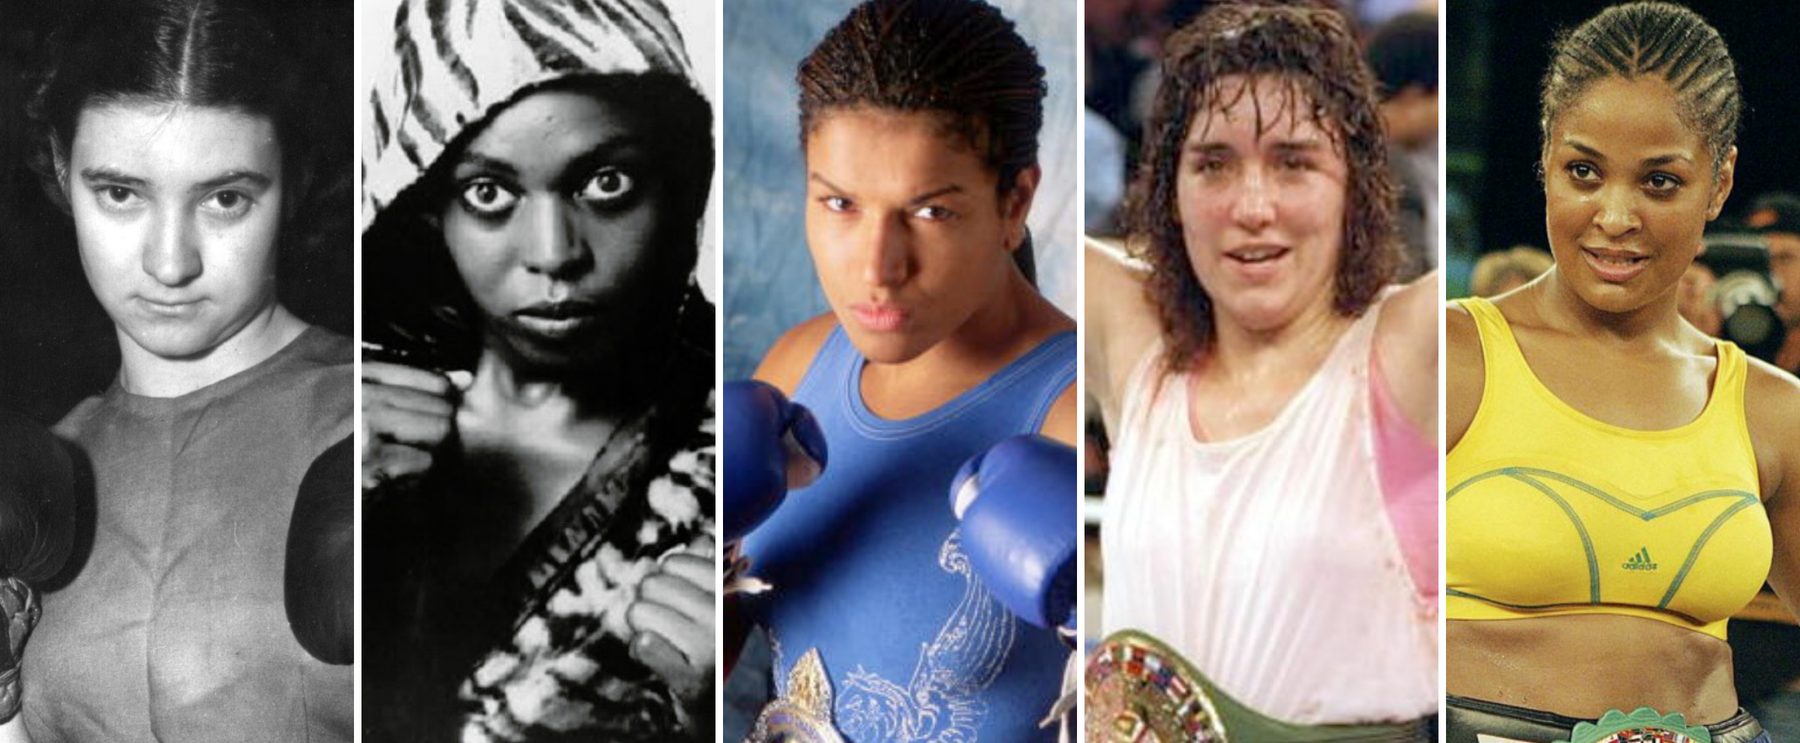 FightCamp - The Best Female Boxers in History